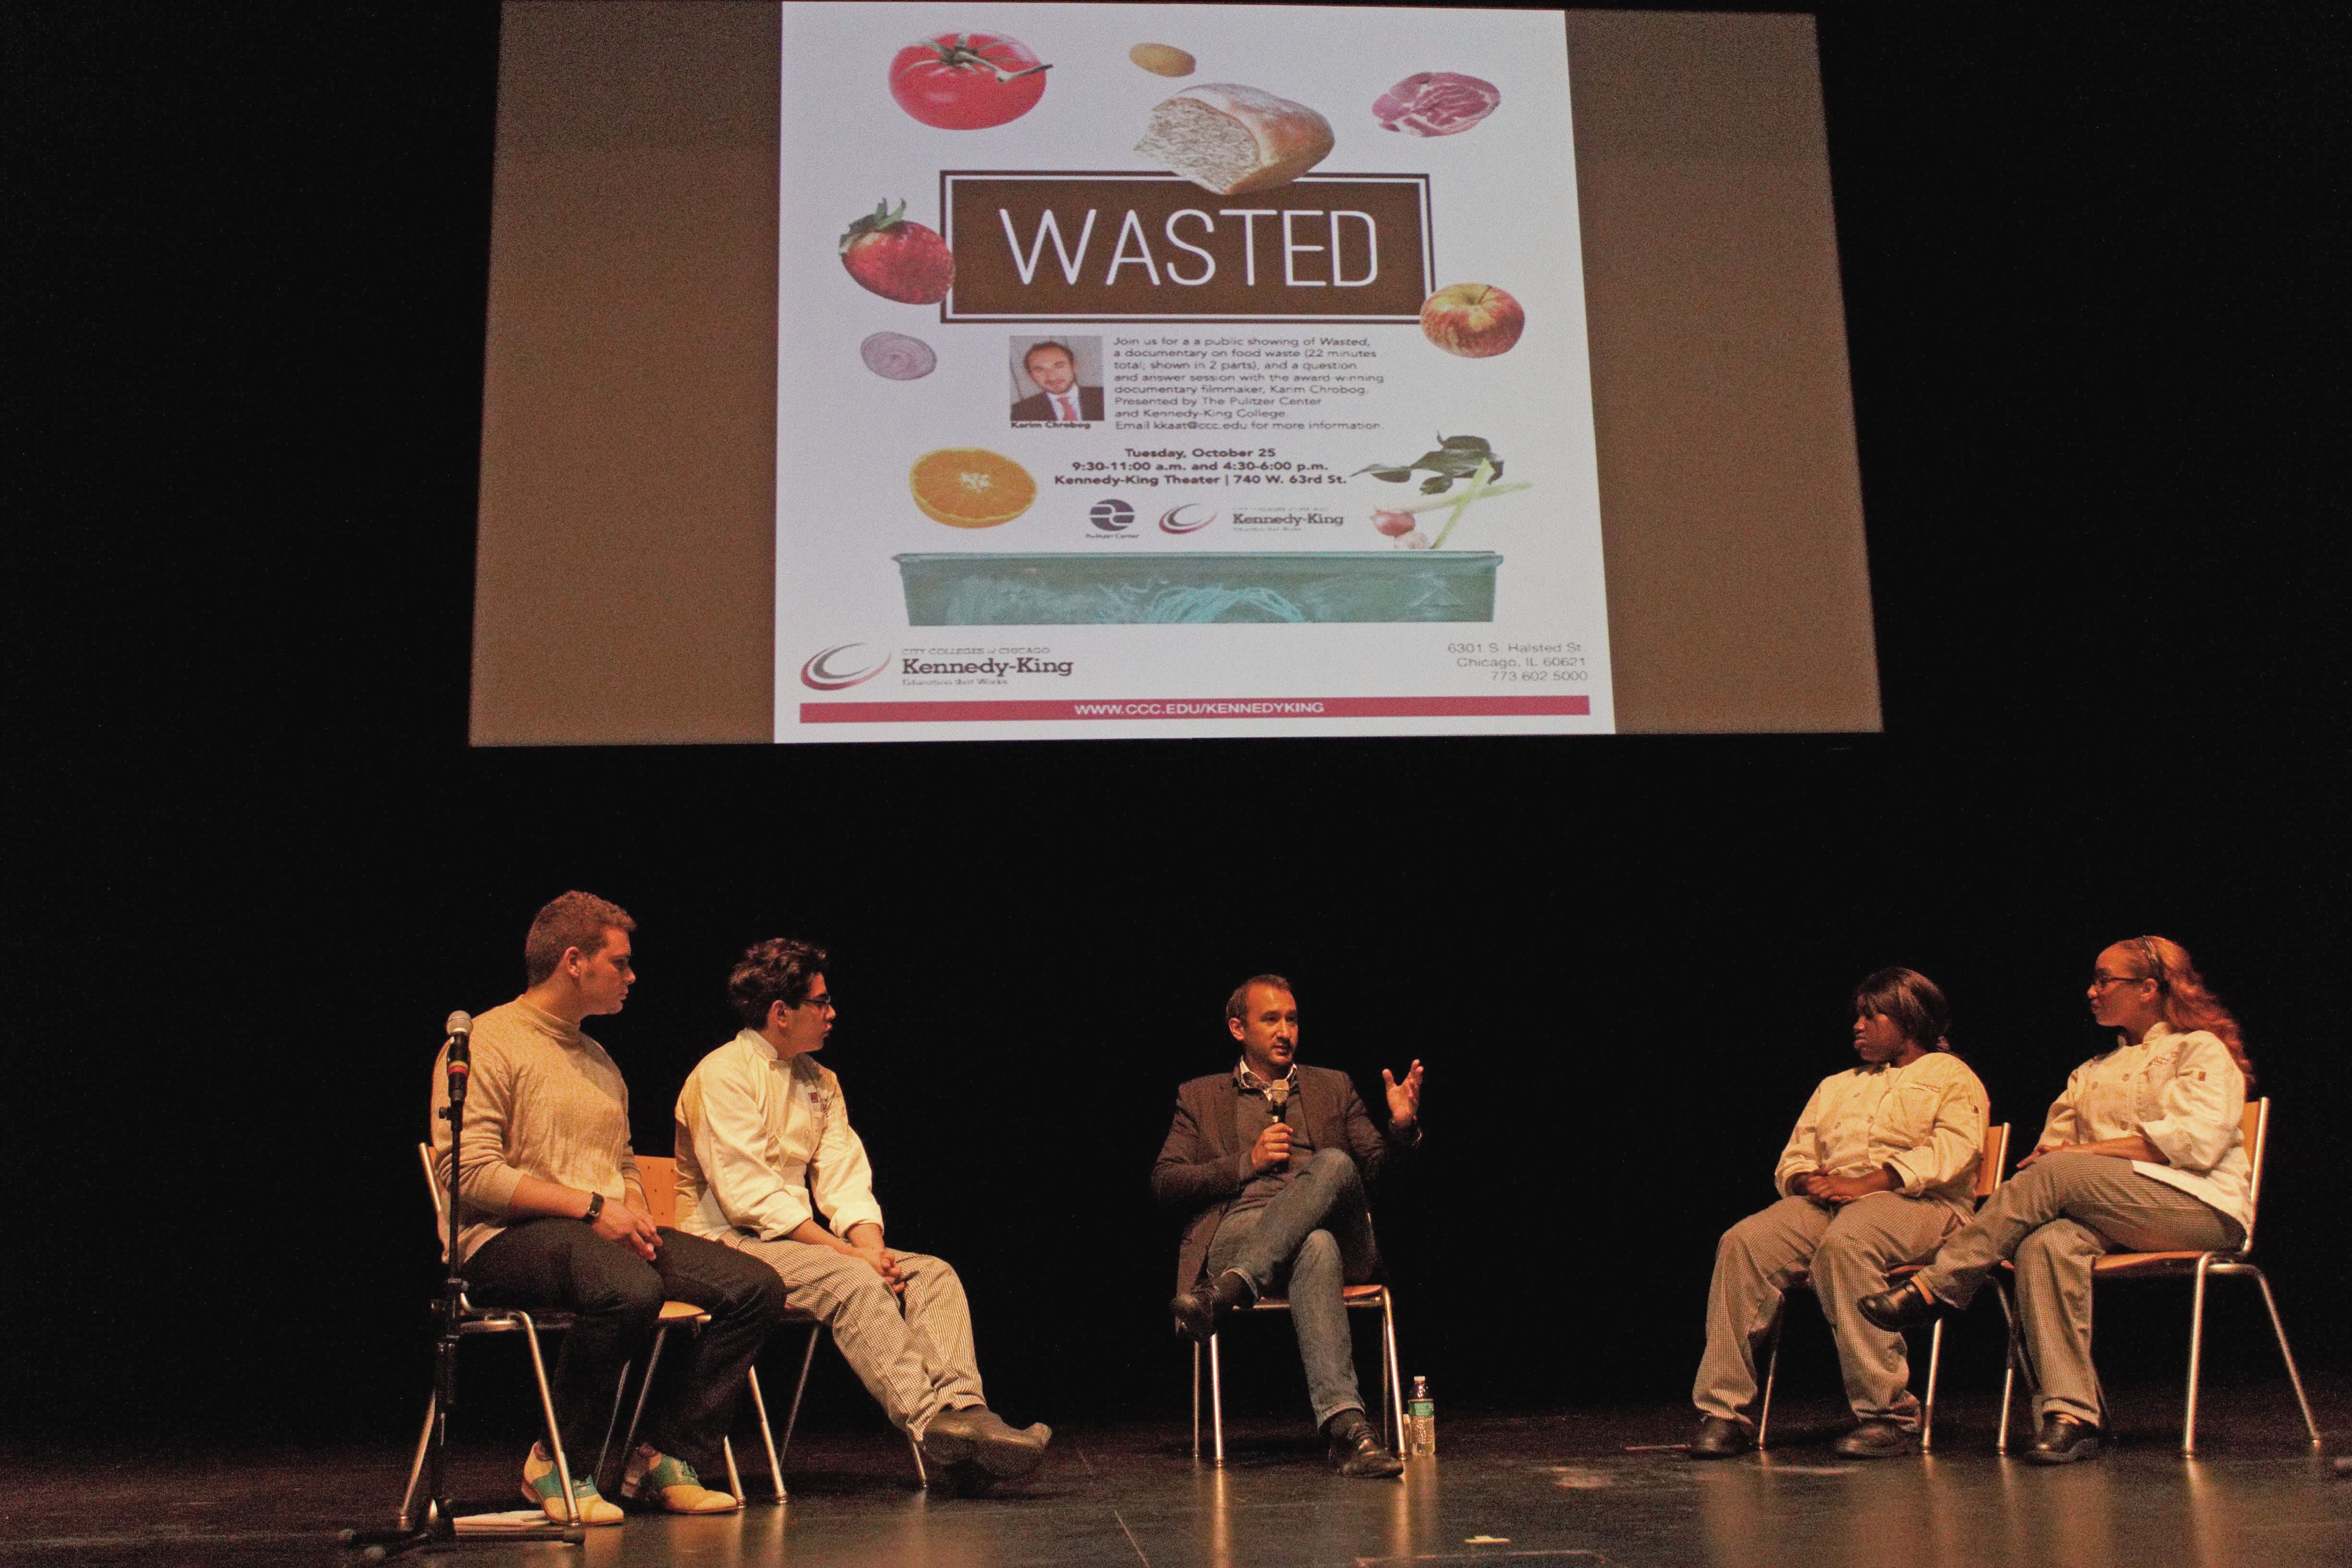 Following a screening of 'Wasted,' Karim Chrobog participates in a Q&A with Kennedy King College culinary and media students Sam Lenzini, Yared Perez, Kira Scott and Kayla Webb. Image by Lauren Shepherd. U.S., 2016.